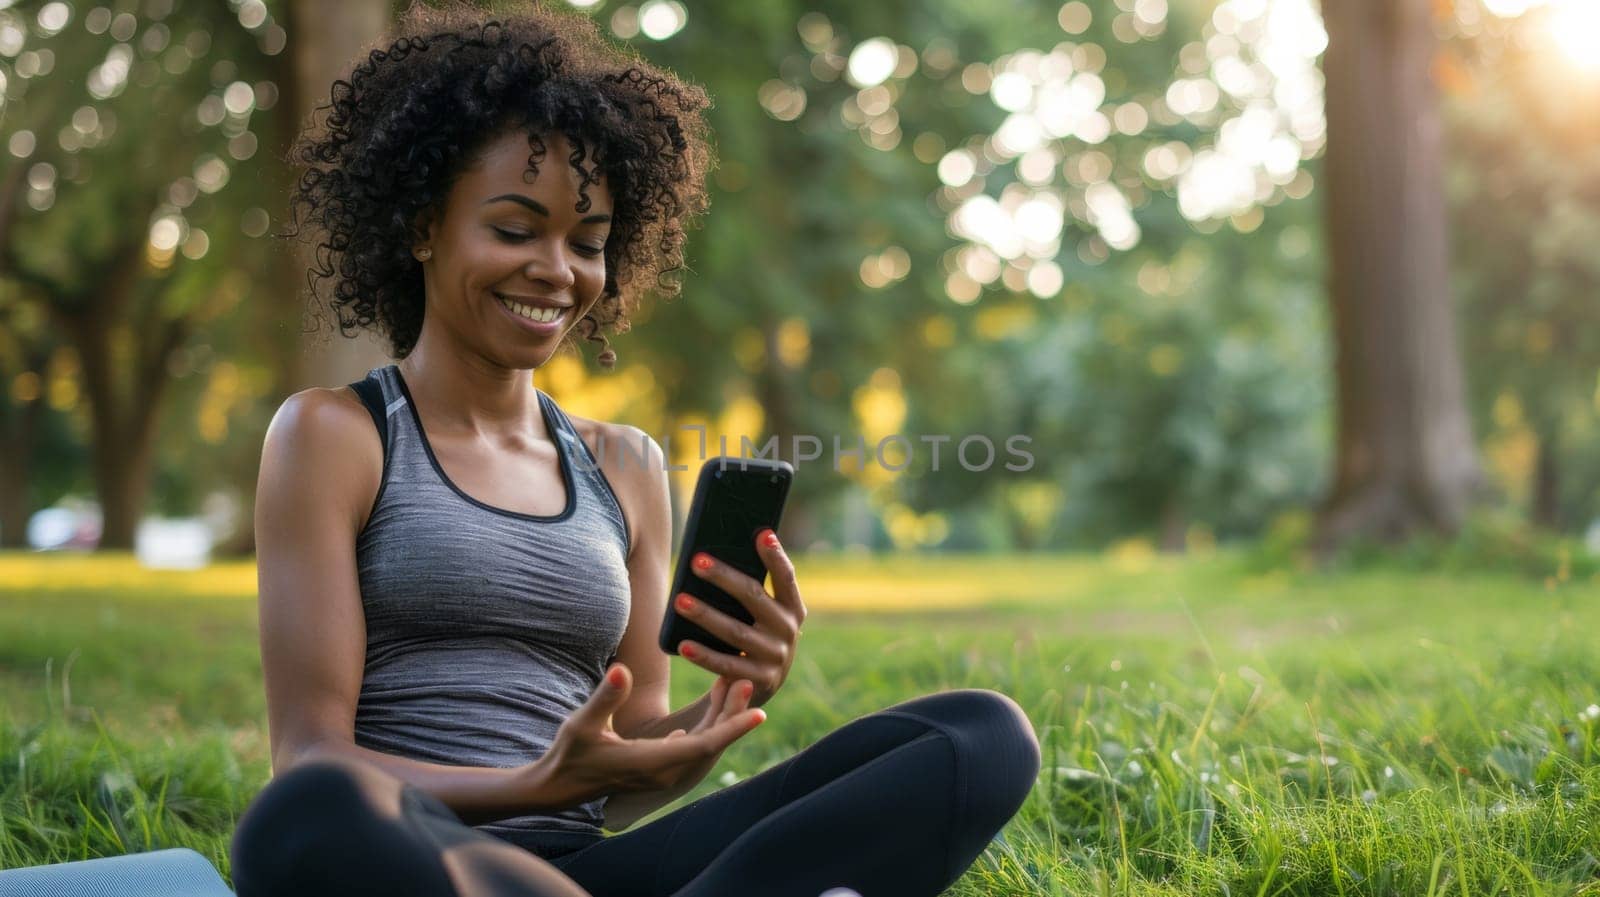 A woman sitting in the grass with a cell phone